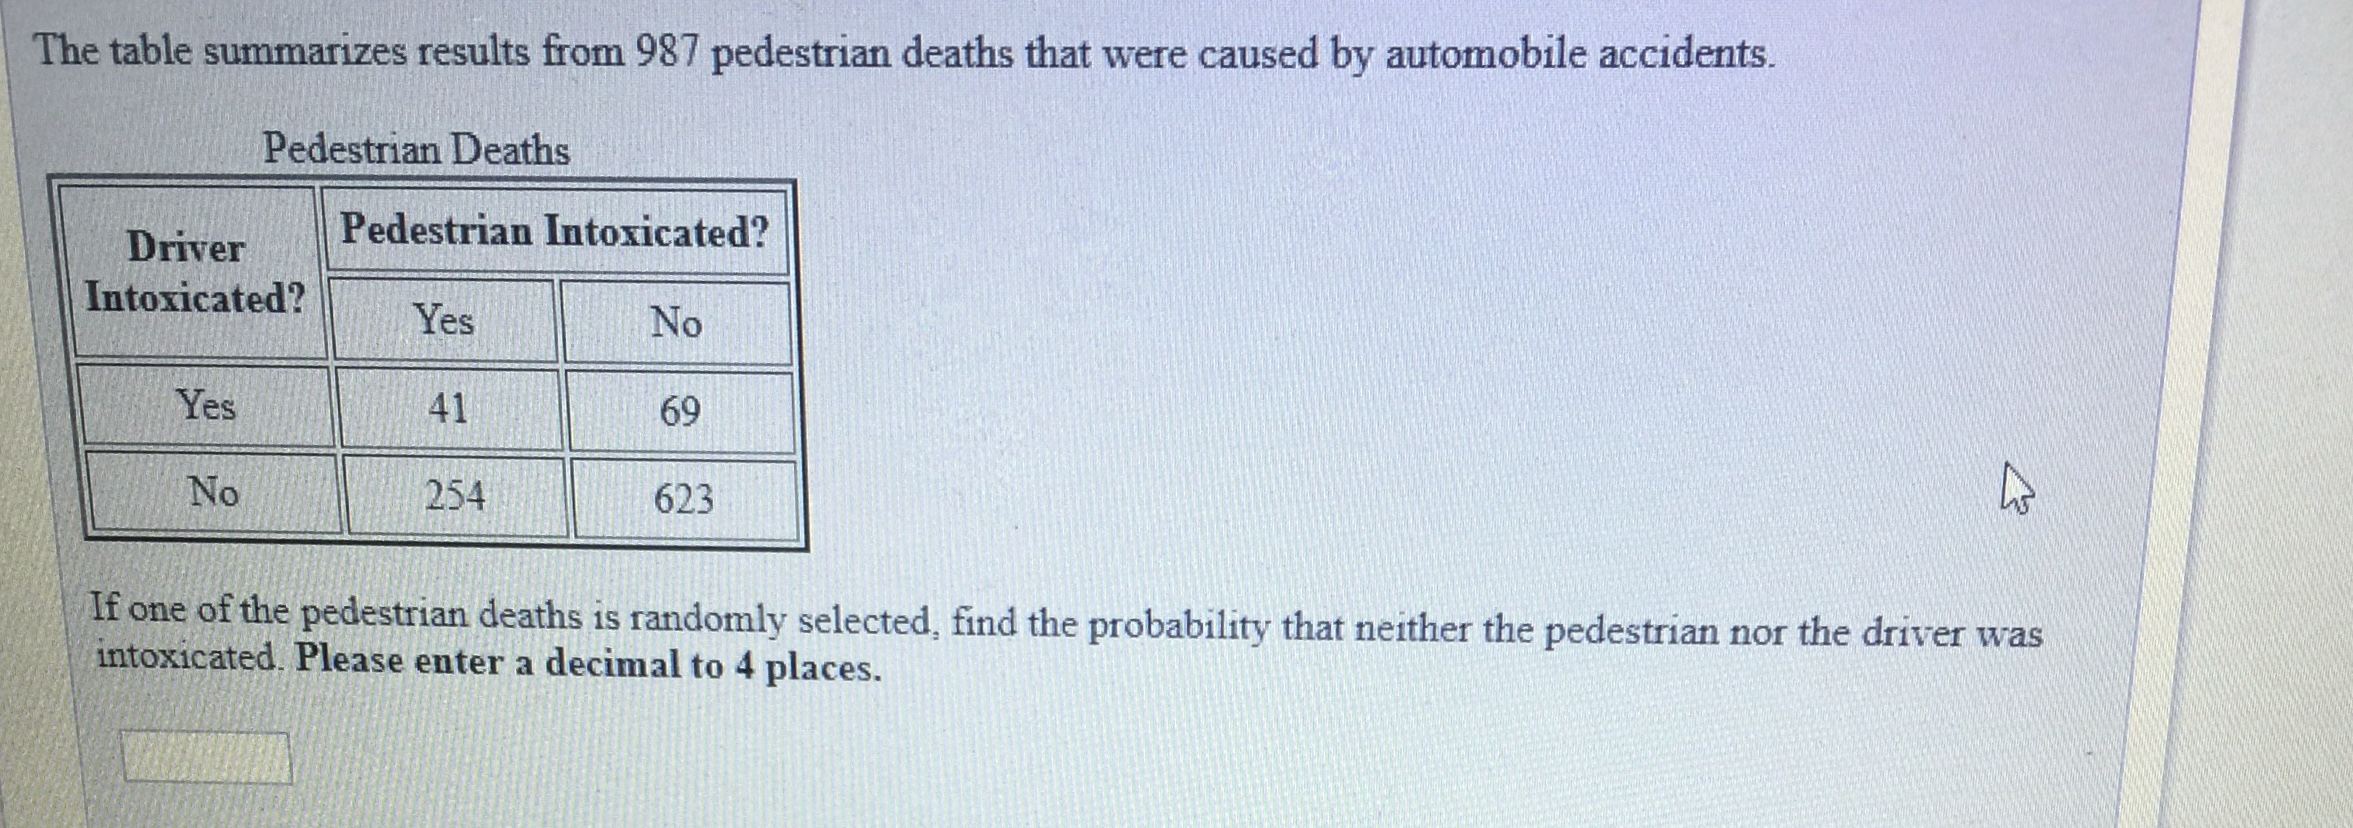 The table summarizes results from 987 pedestrian deaths that were caused by automobile accidents.
Pedestrian Deaths
Pedestrian Intoxicated?
Driver
Intoxicated?YesNo
Yes
41
69
No
254
623
If one of the pedestrian deaths is randomly selected, find the probability that neither the pedestrian nor the driver was
intoxicated. Please enter a decimal to 4 places
